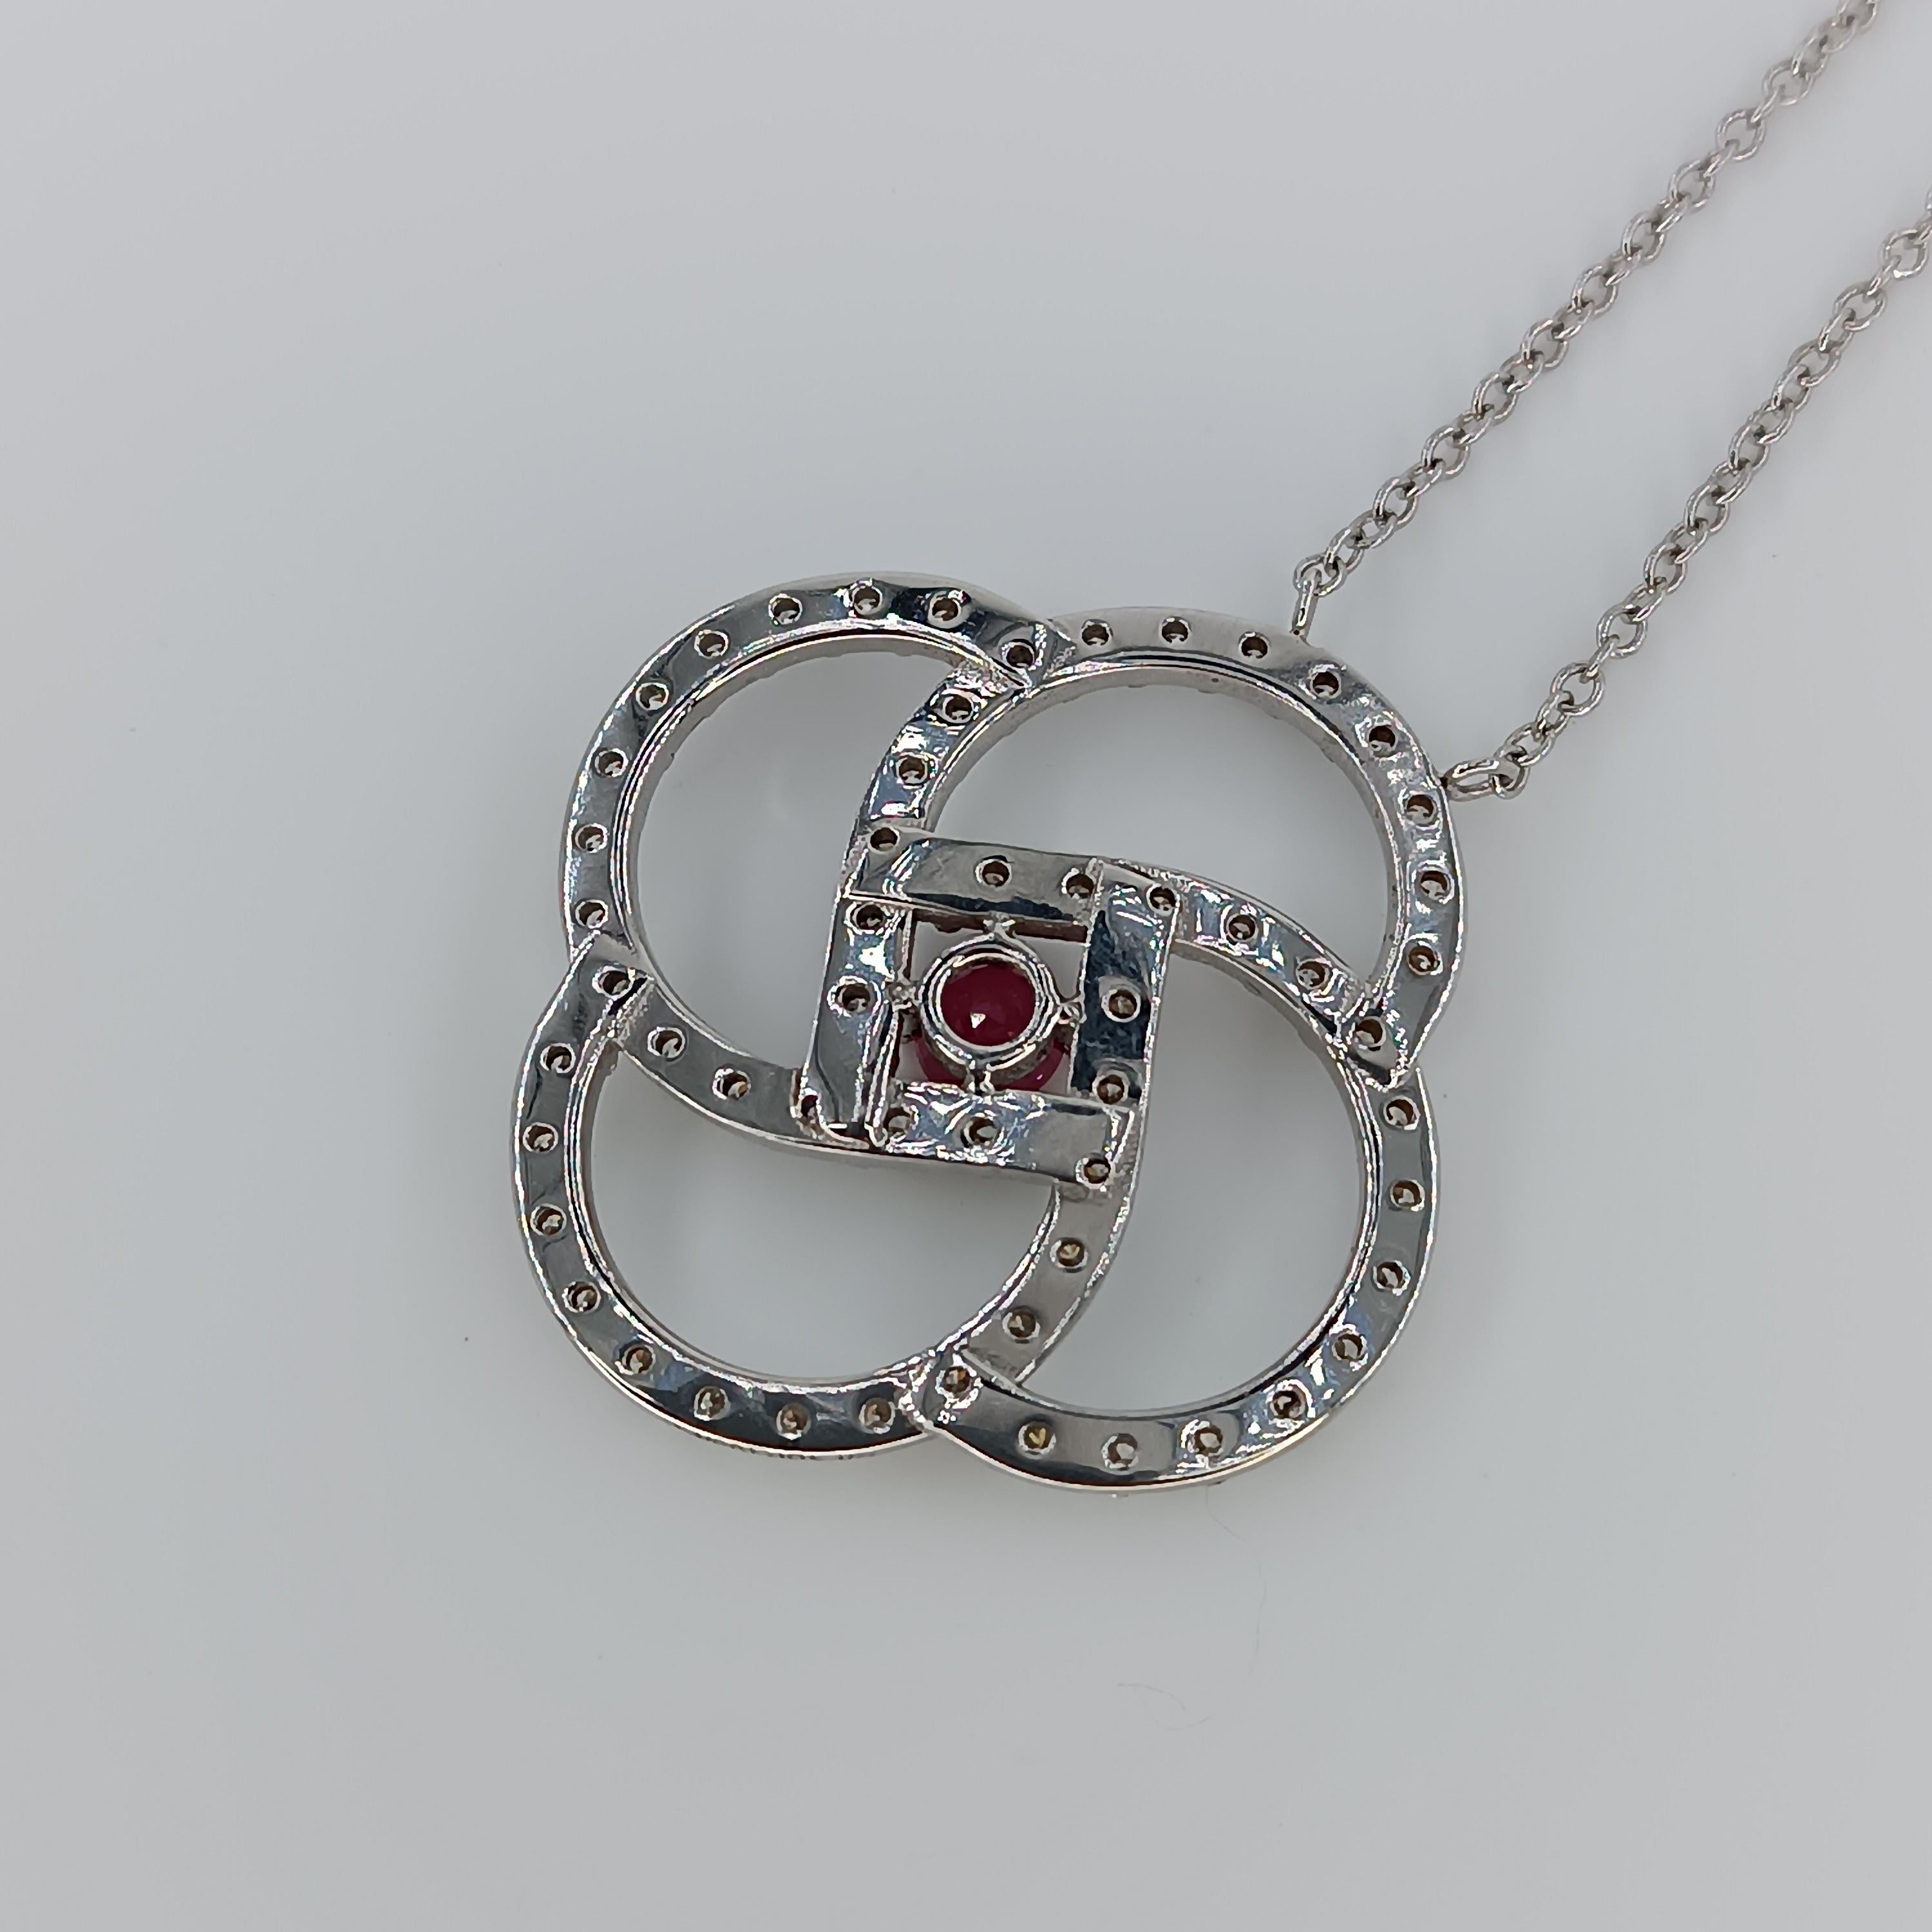 Brilliant Cut 0.55 Carat Ruby with VS G Color Diamonds 1.68 Carats. White Gold Necklace For Sale